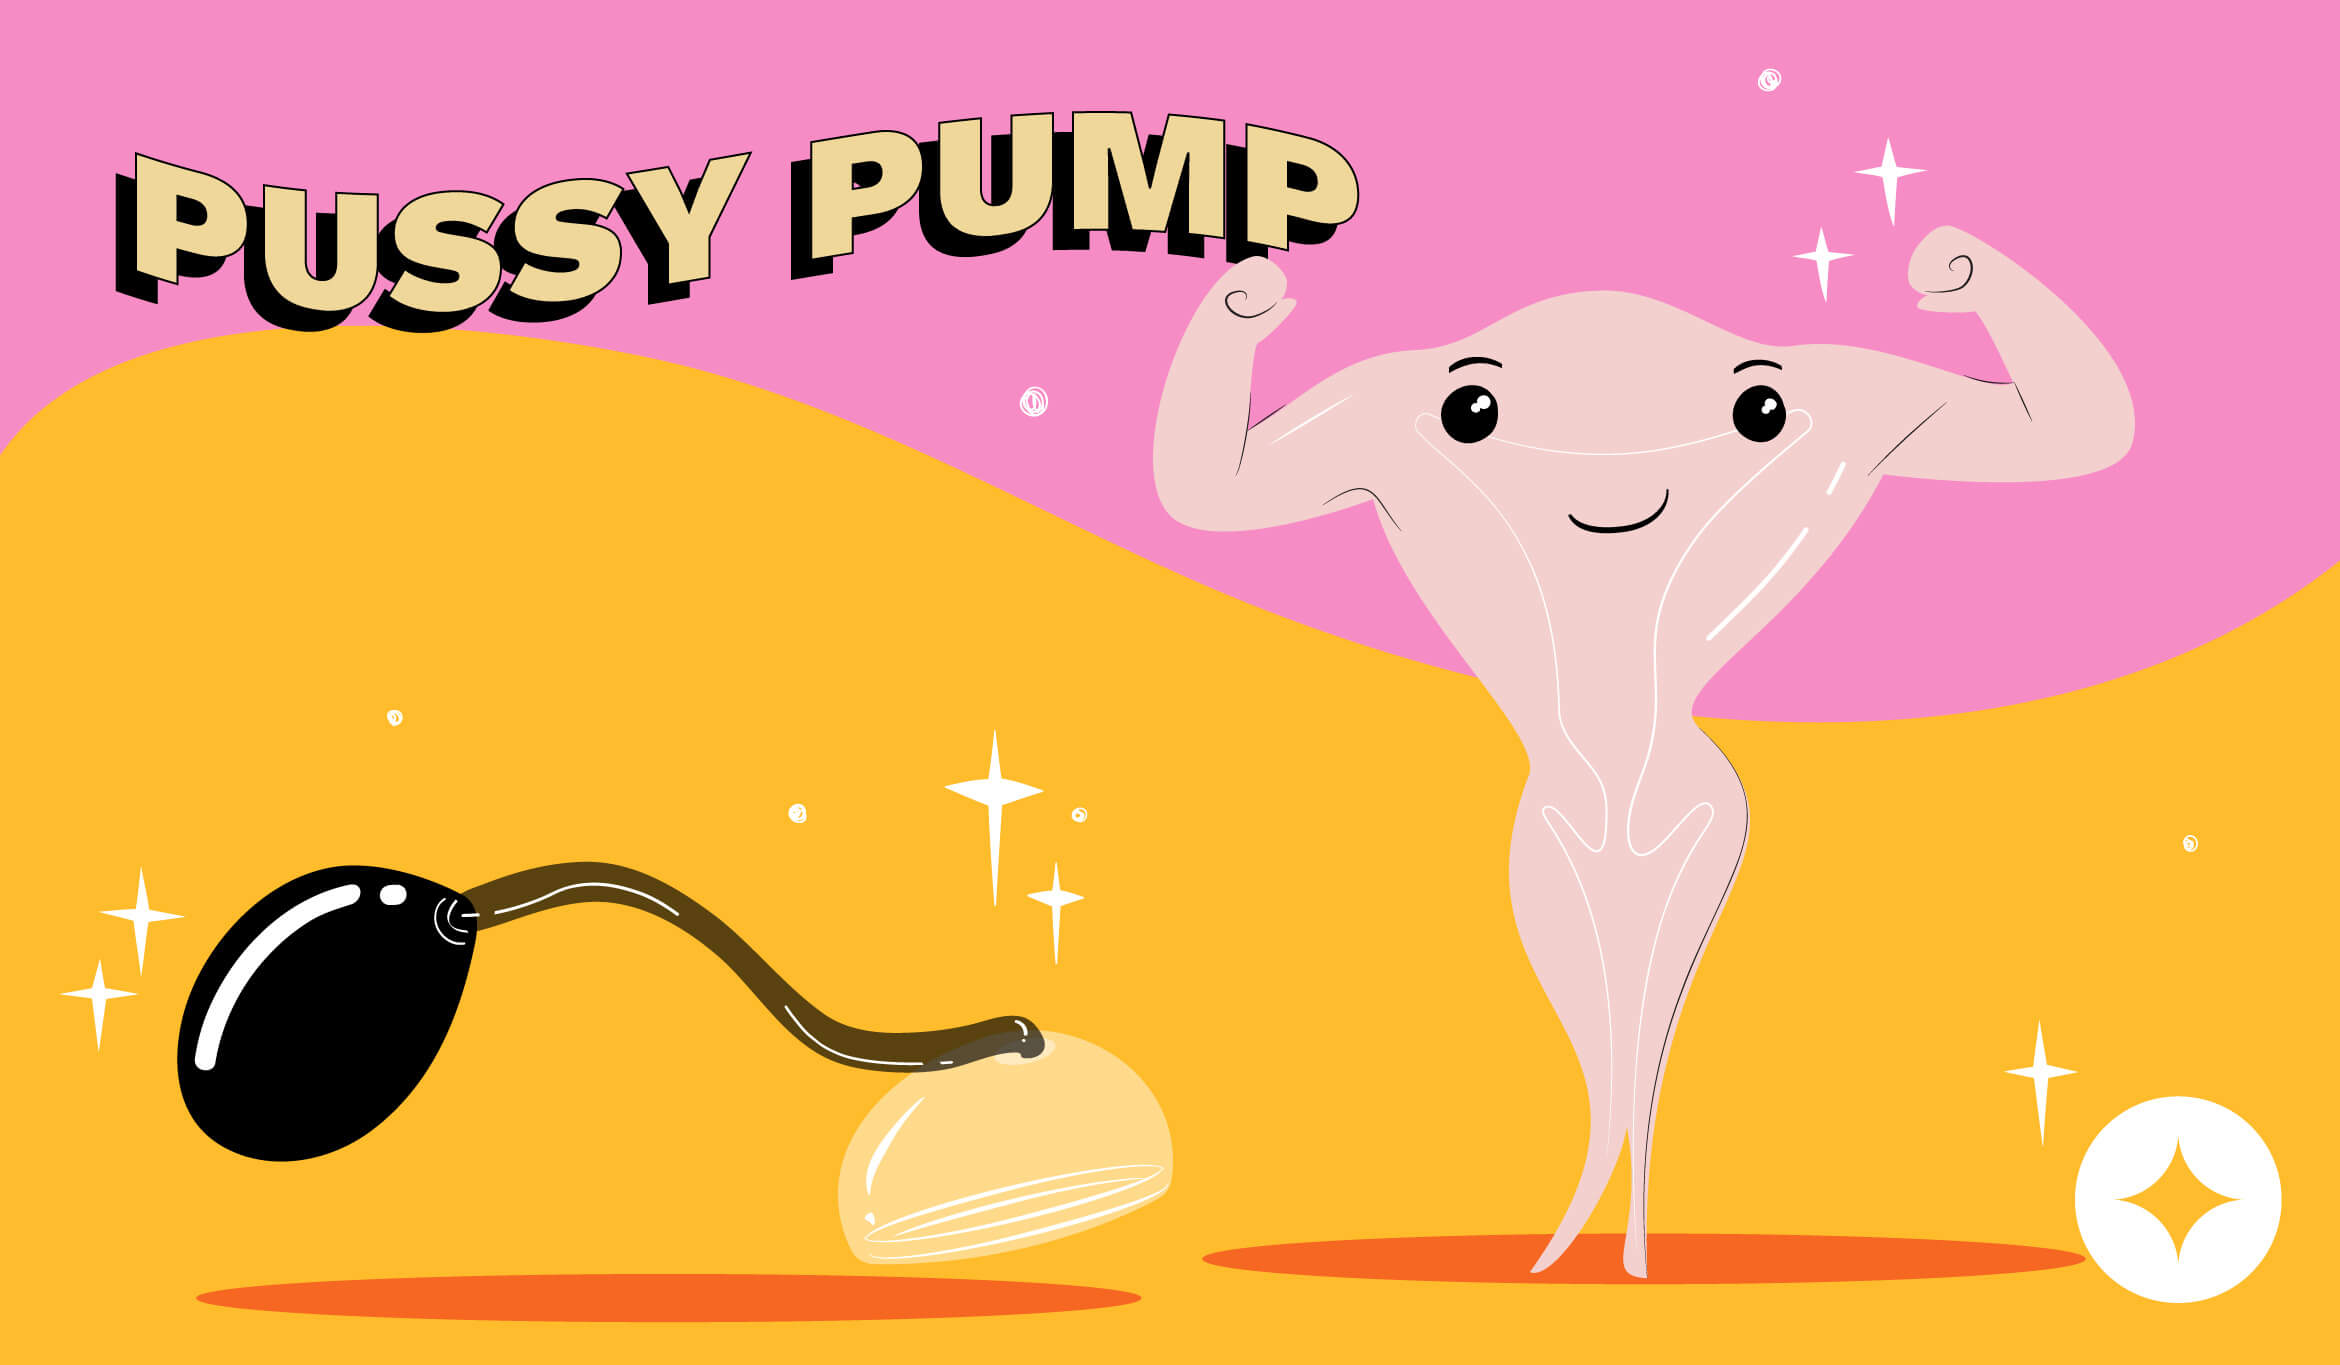 Pussy Pump Complete Guide to Pussy Pumping for Beginners (NEW) pic photo